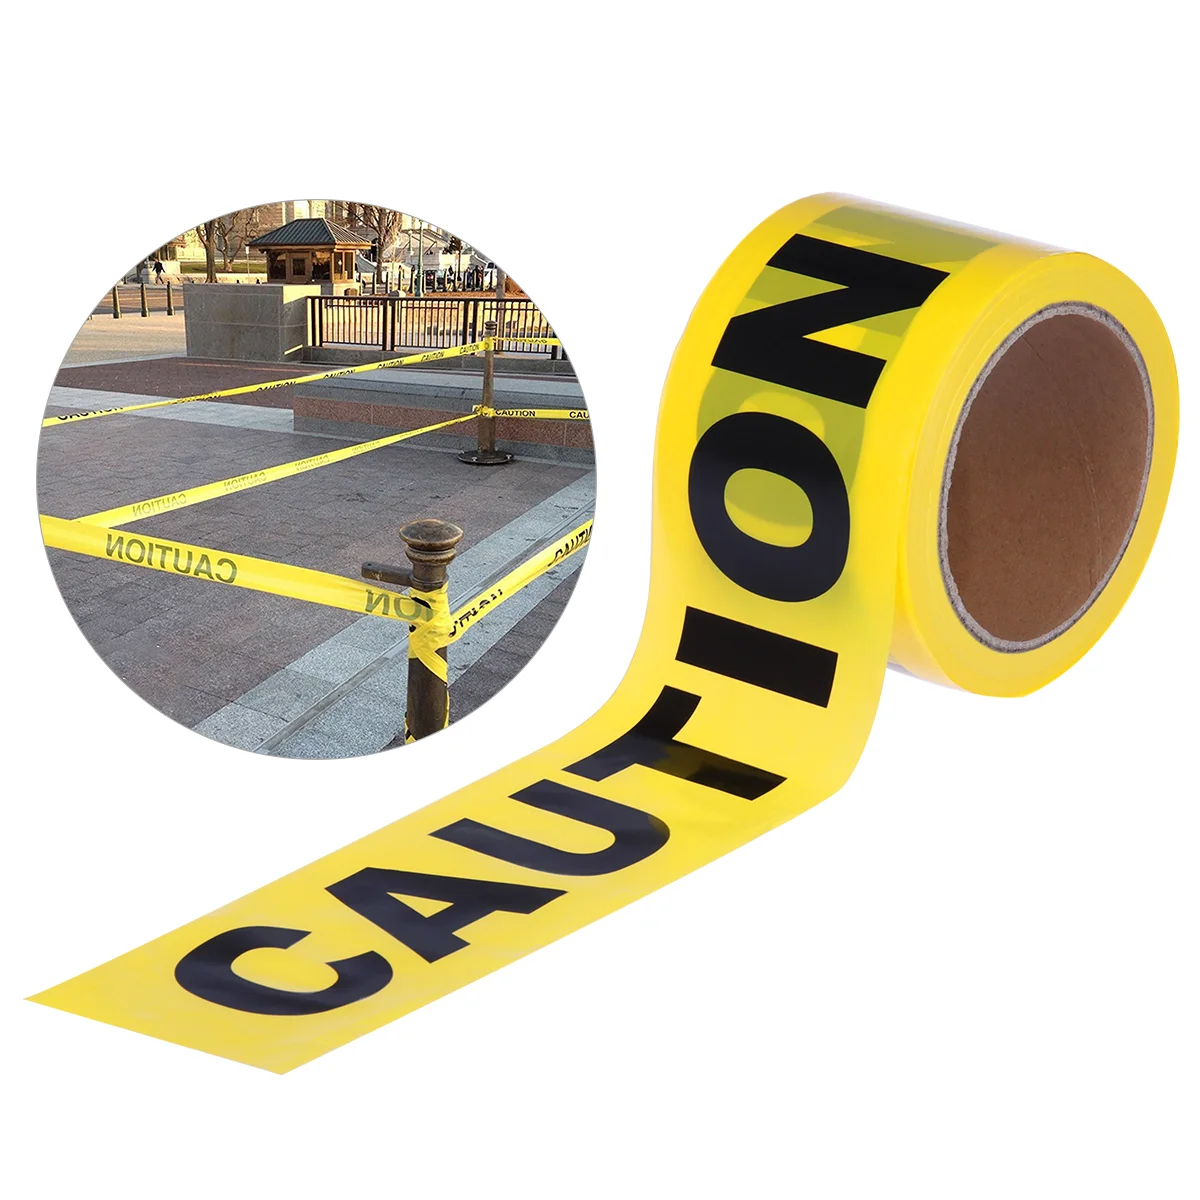 

UEETEK 100M Barricade Caution Tape Warning Tape for Law Enforcement Construction Public Works Safety